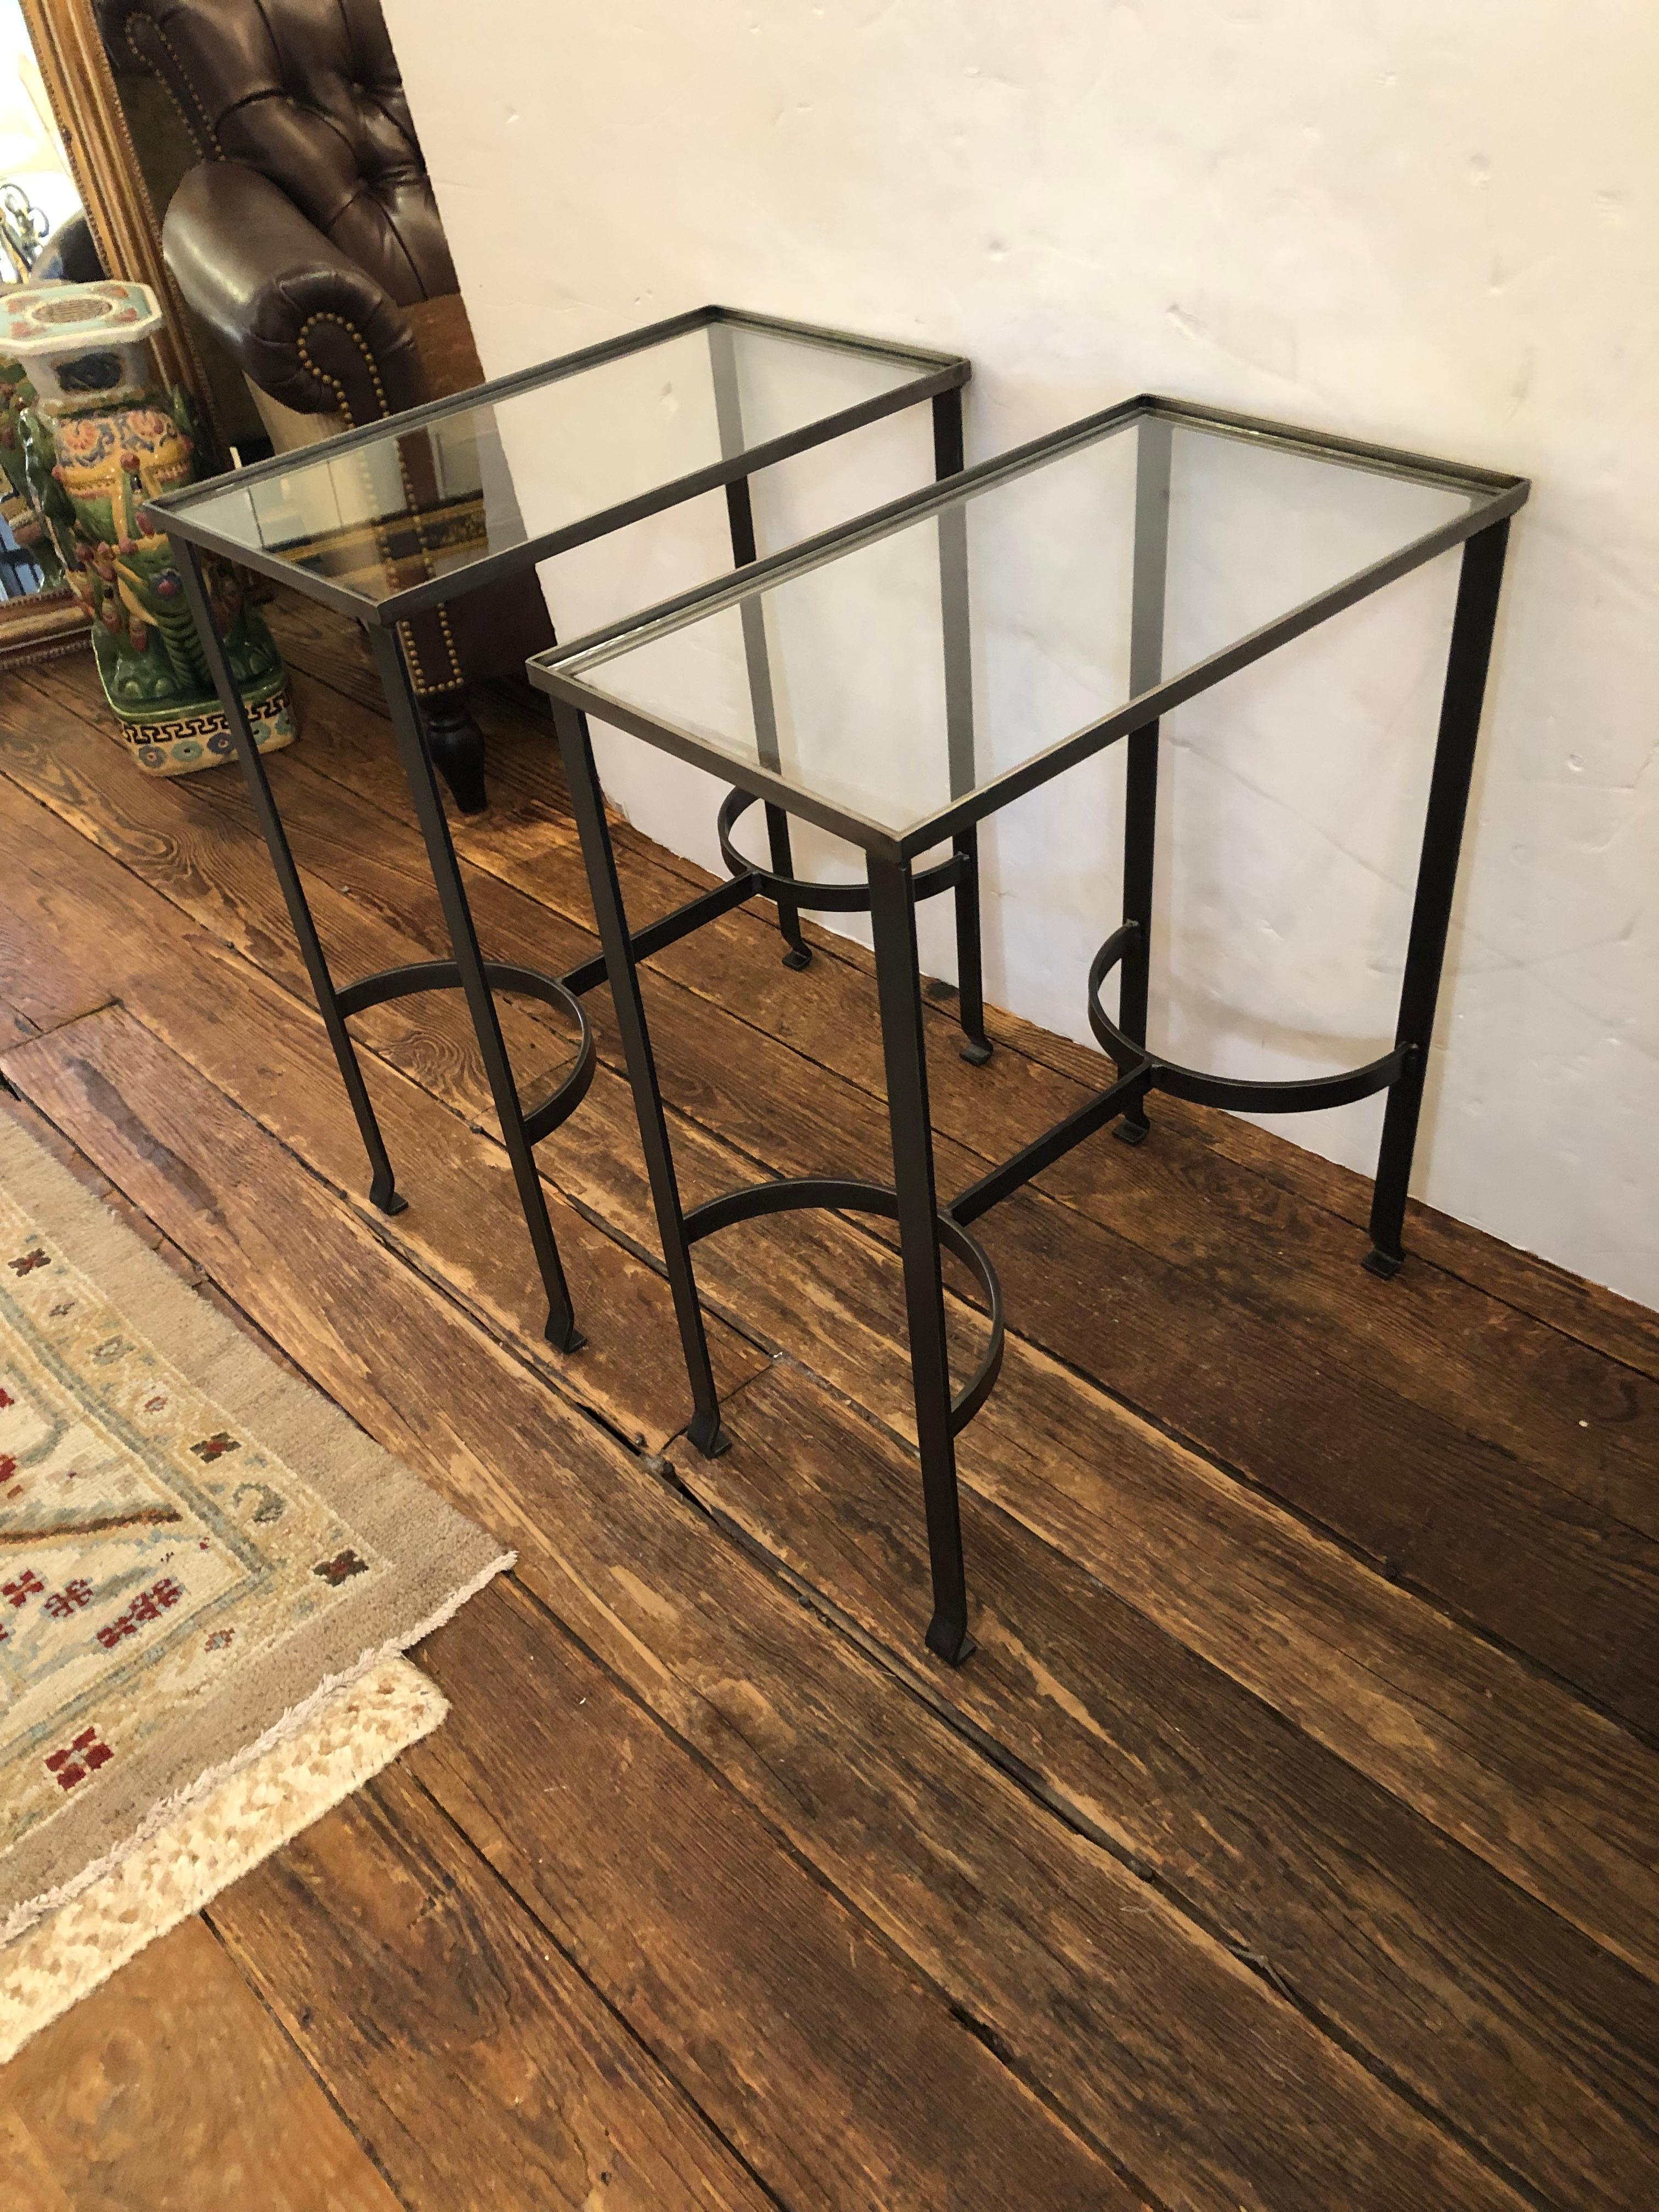 Streamlined modern gunmetal steel and glass top rectangular pair of end tables in a compact elegant size.